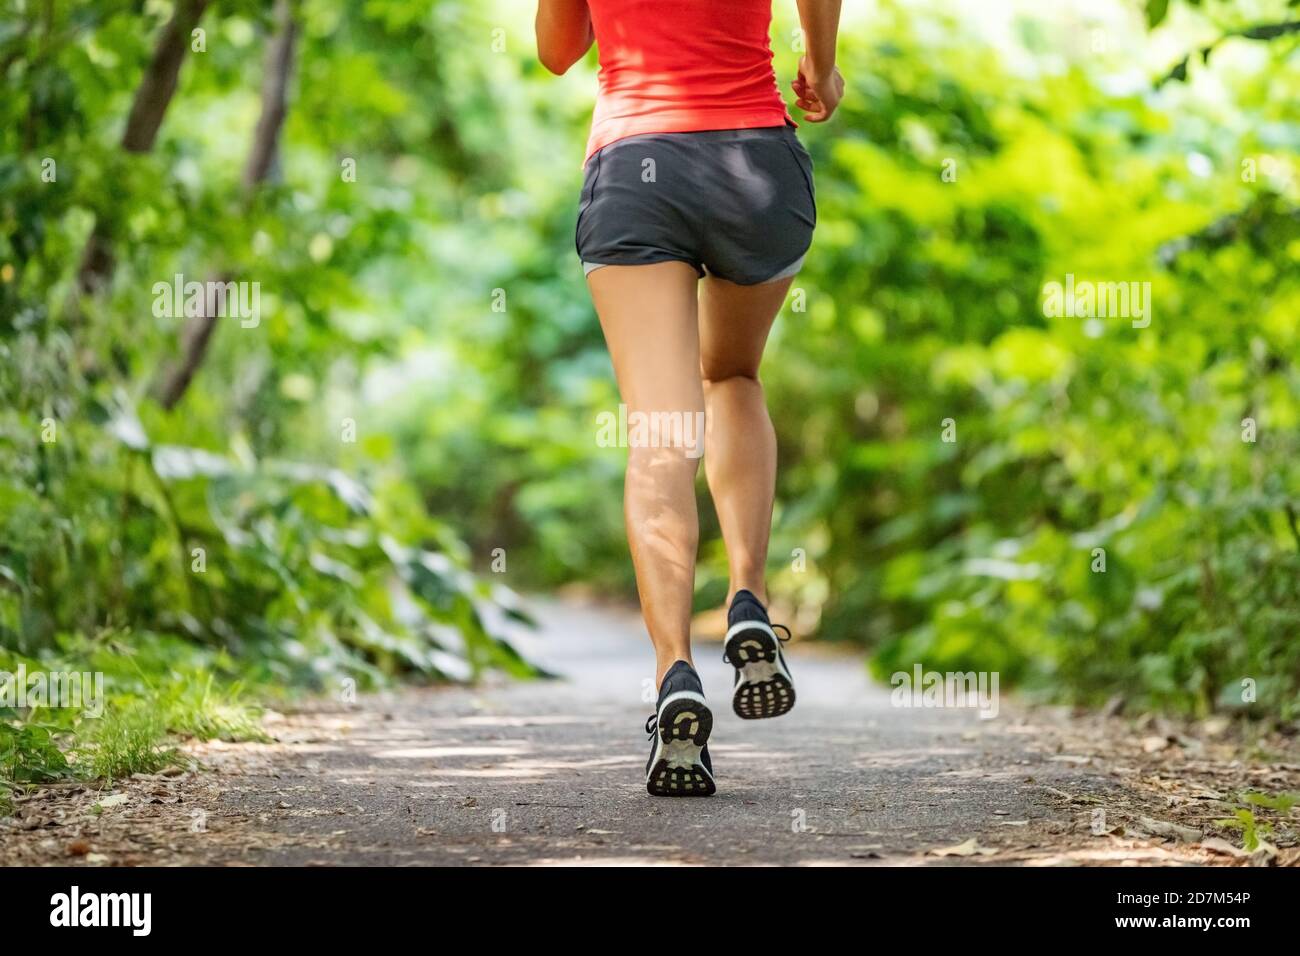 Runner running legs from the back jogging on nature path outside. Running shoes girl training cardio outdoors Stock Photo